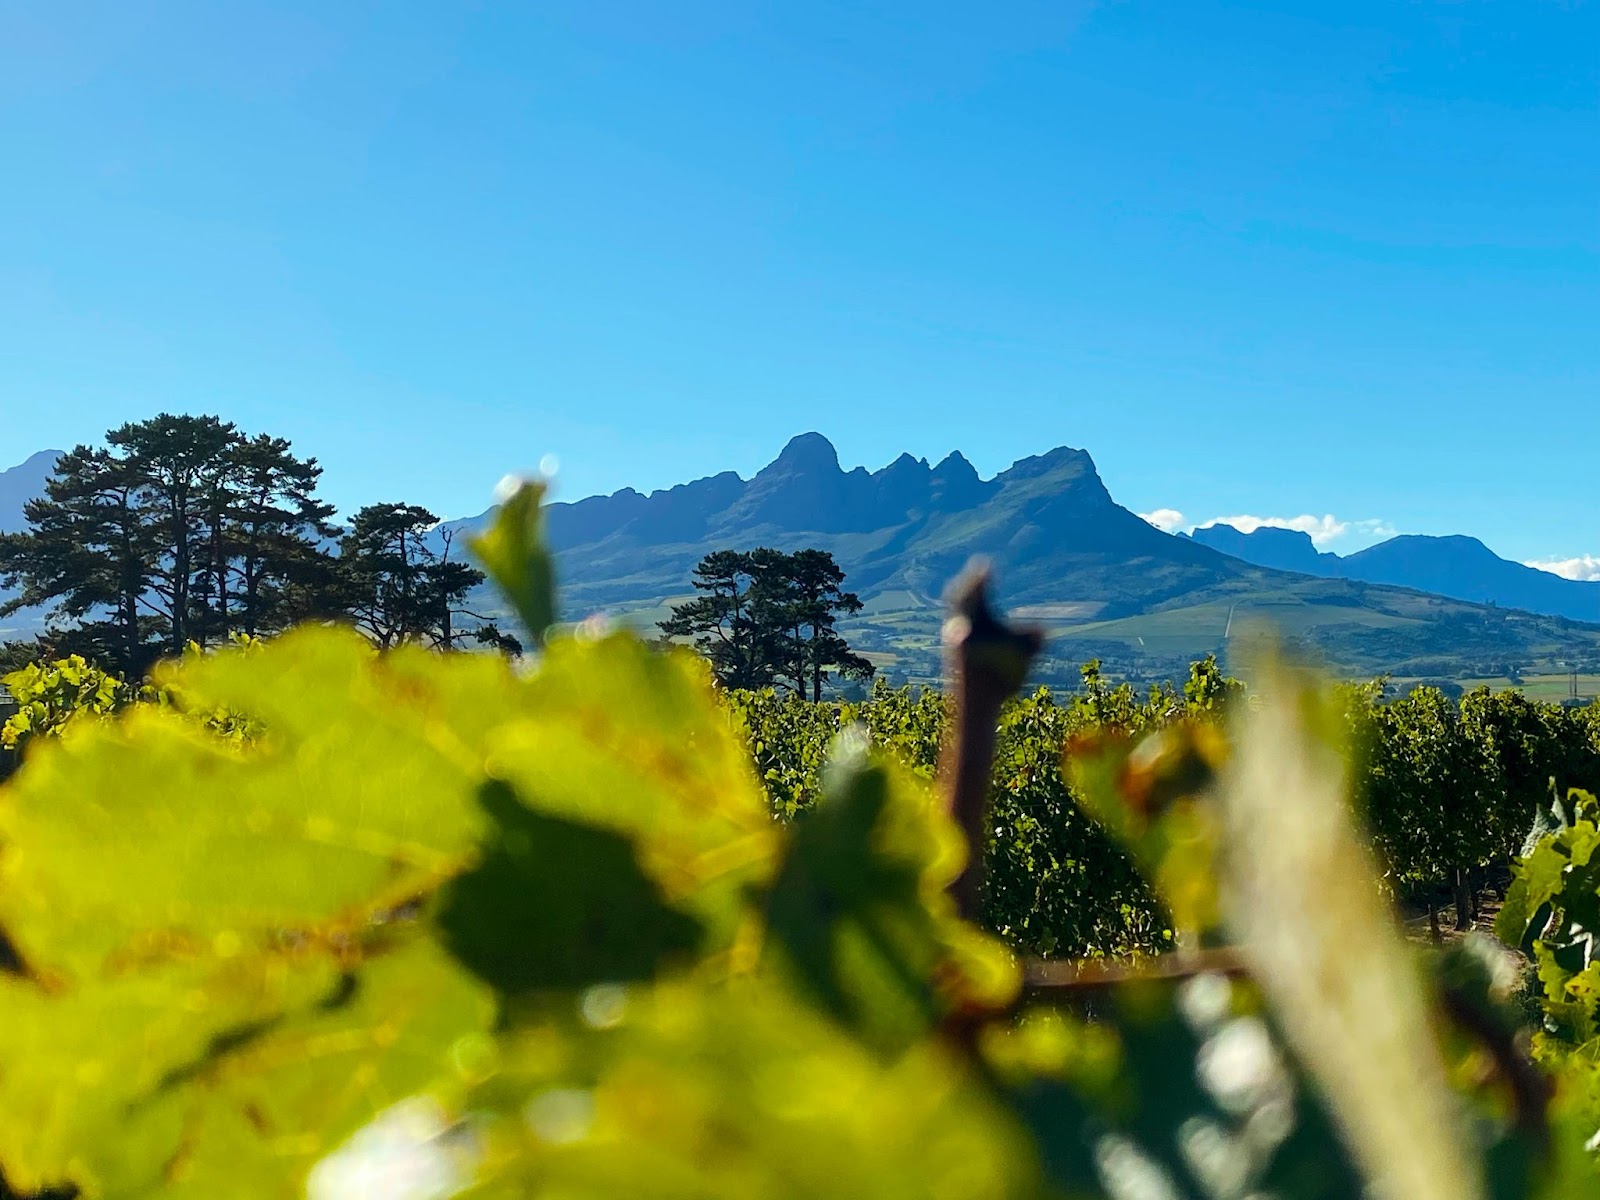 A picture of the beautiful mountains from a wine farm in the Somerset West region